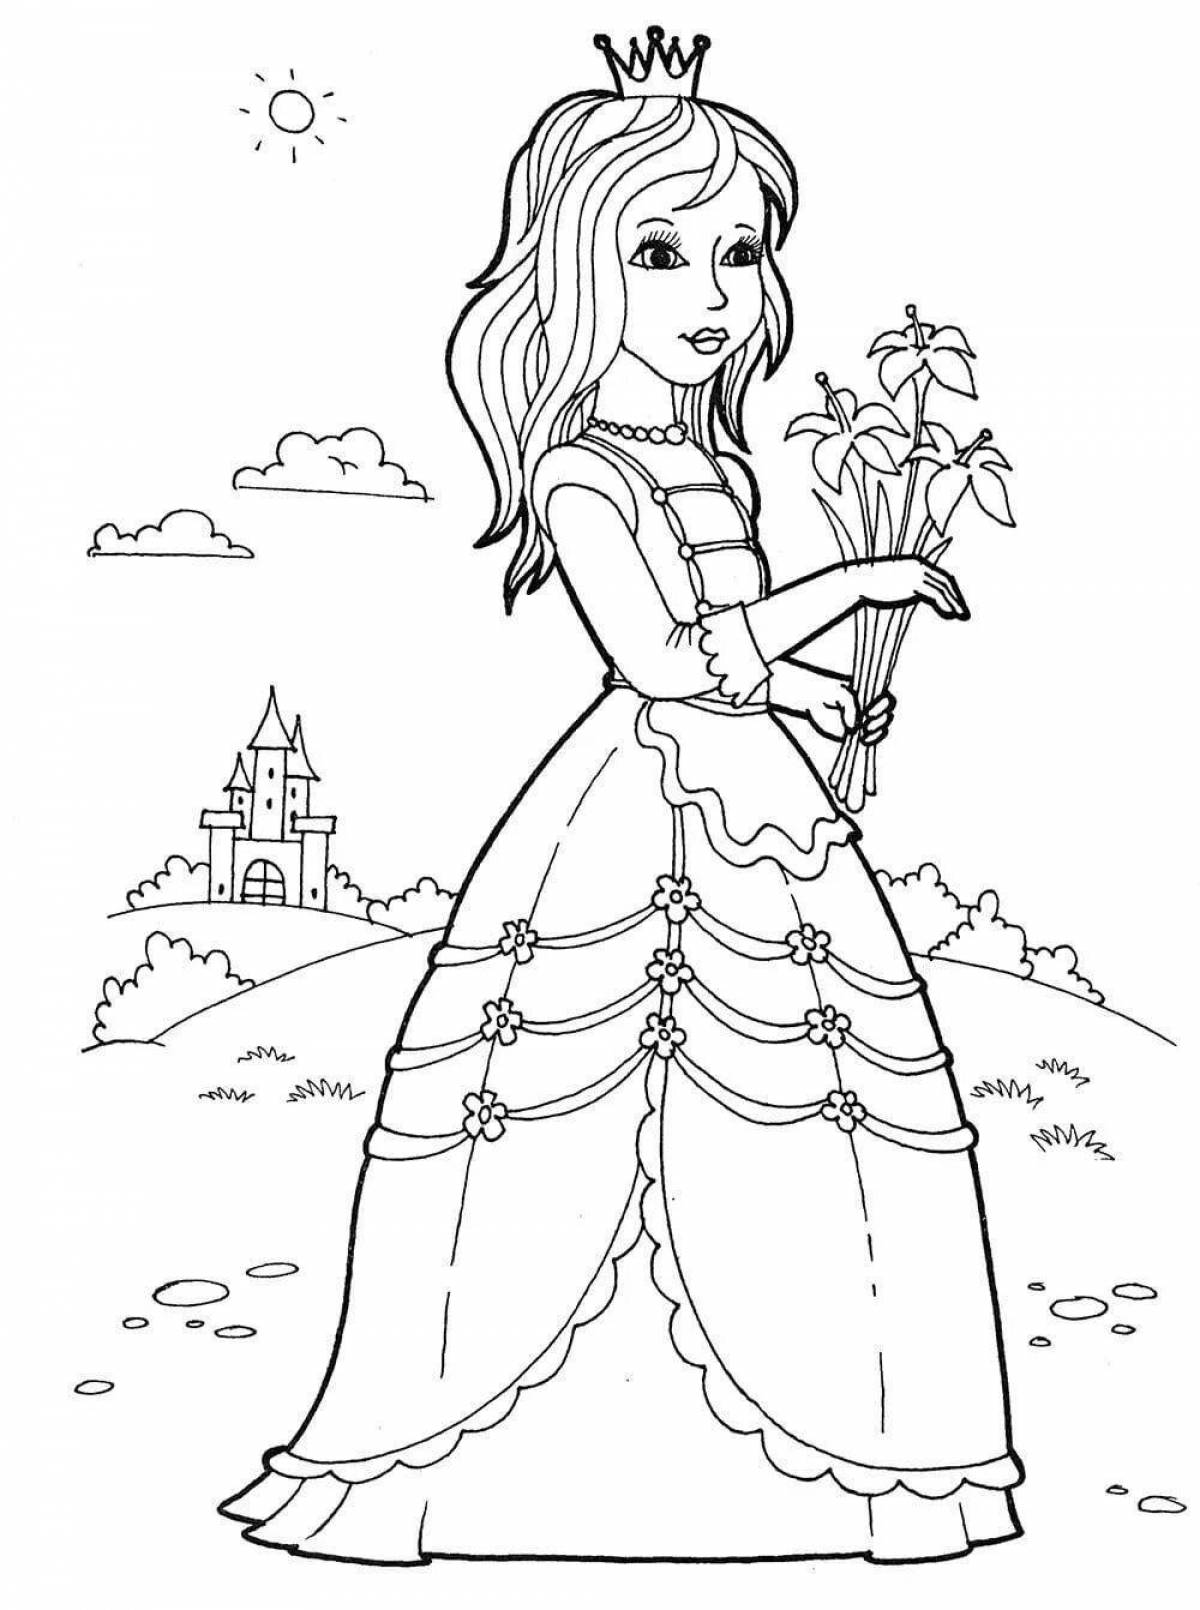 Princess coloring pages for girls 6 years old